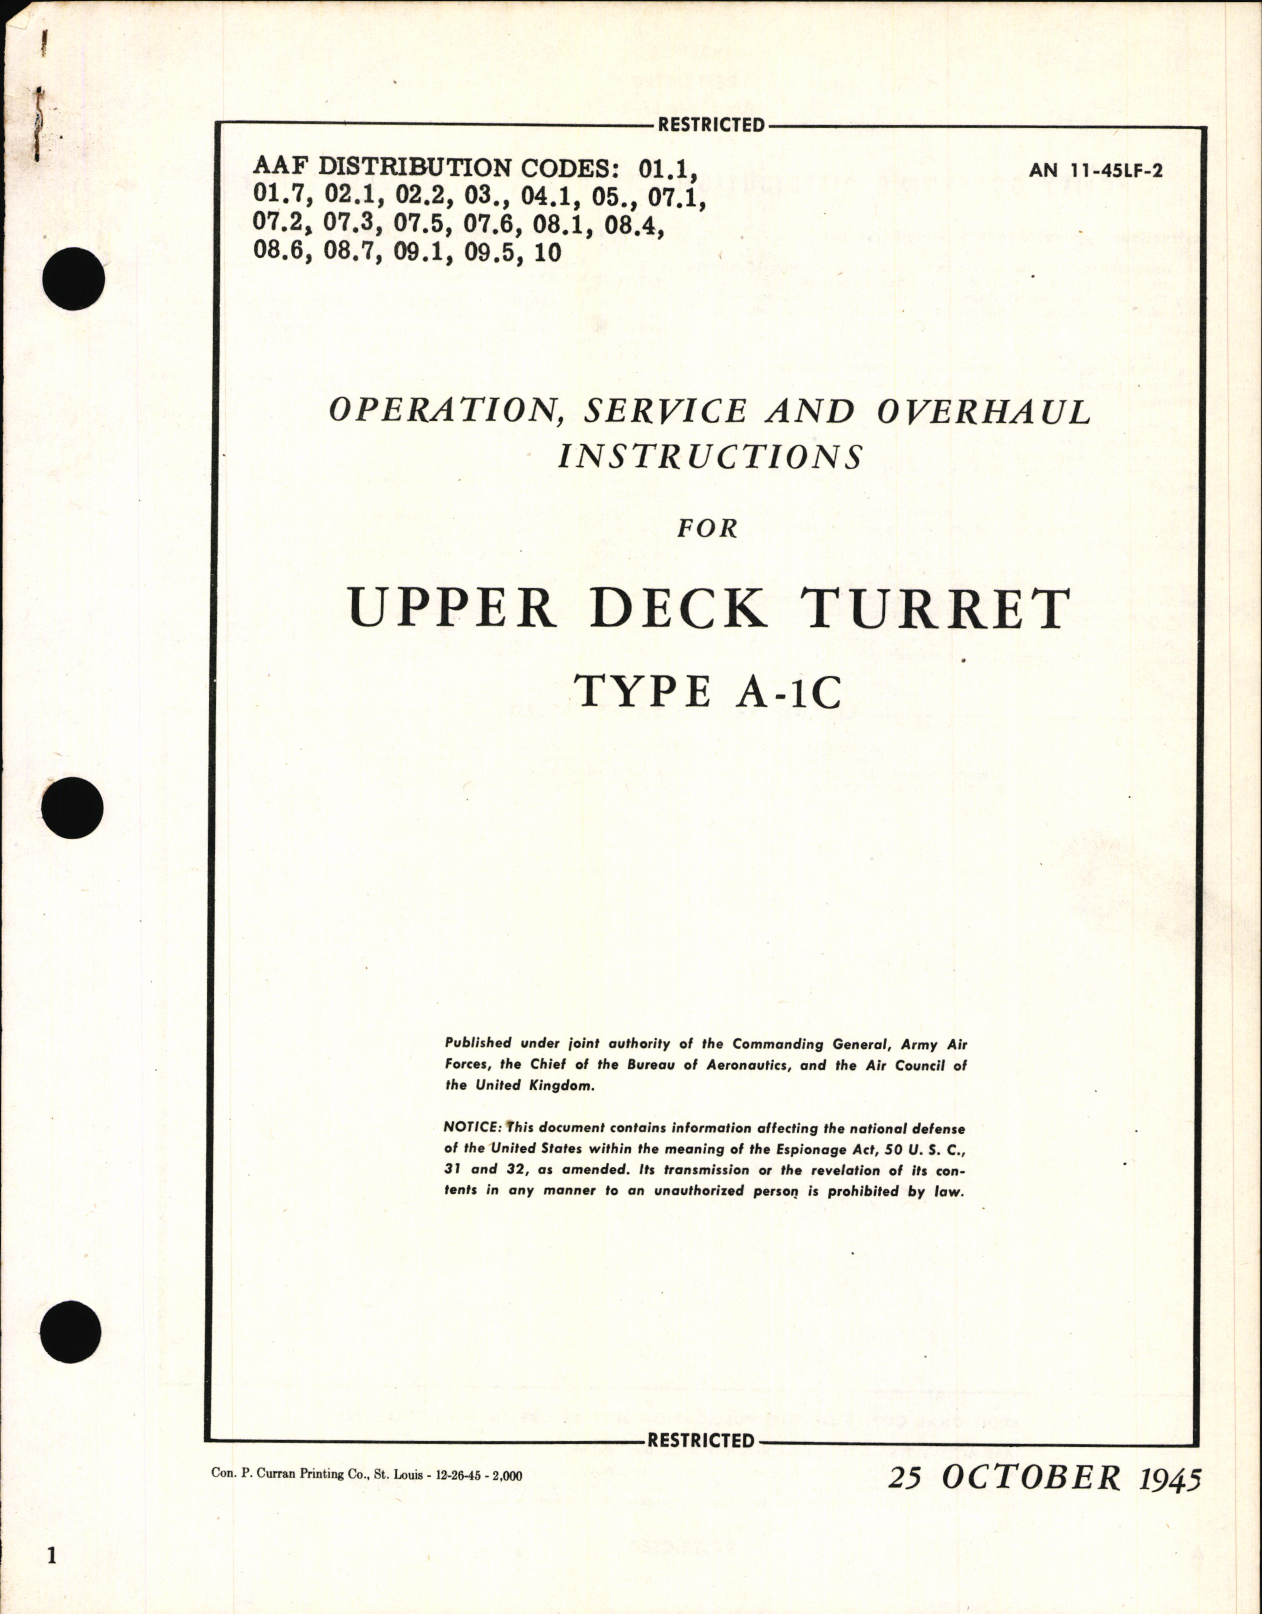 Sample page 1 from AirCorps Library document: Operation, Service, & Overhaul Instructions for Upper Deck Turret Type A-1C